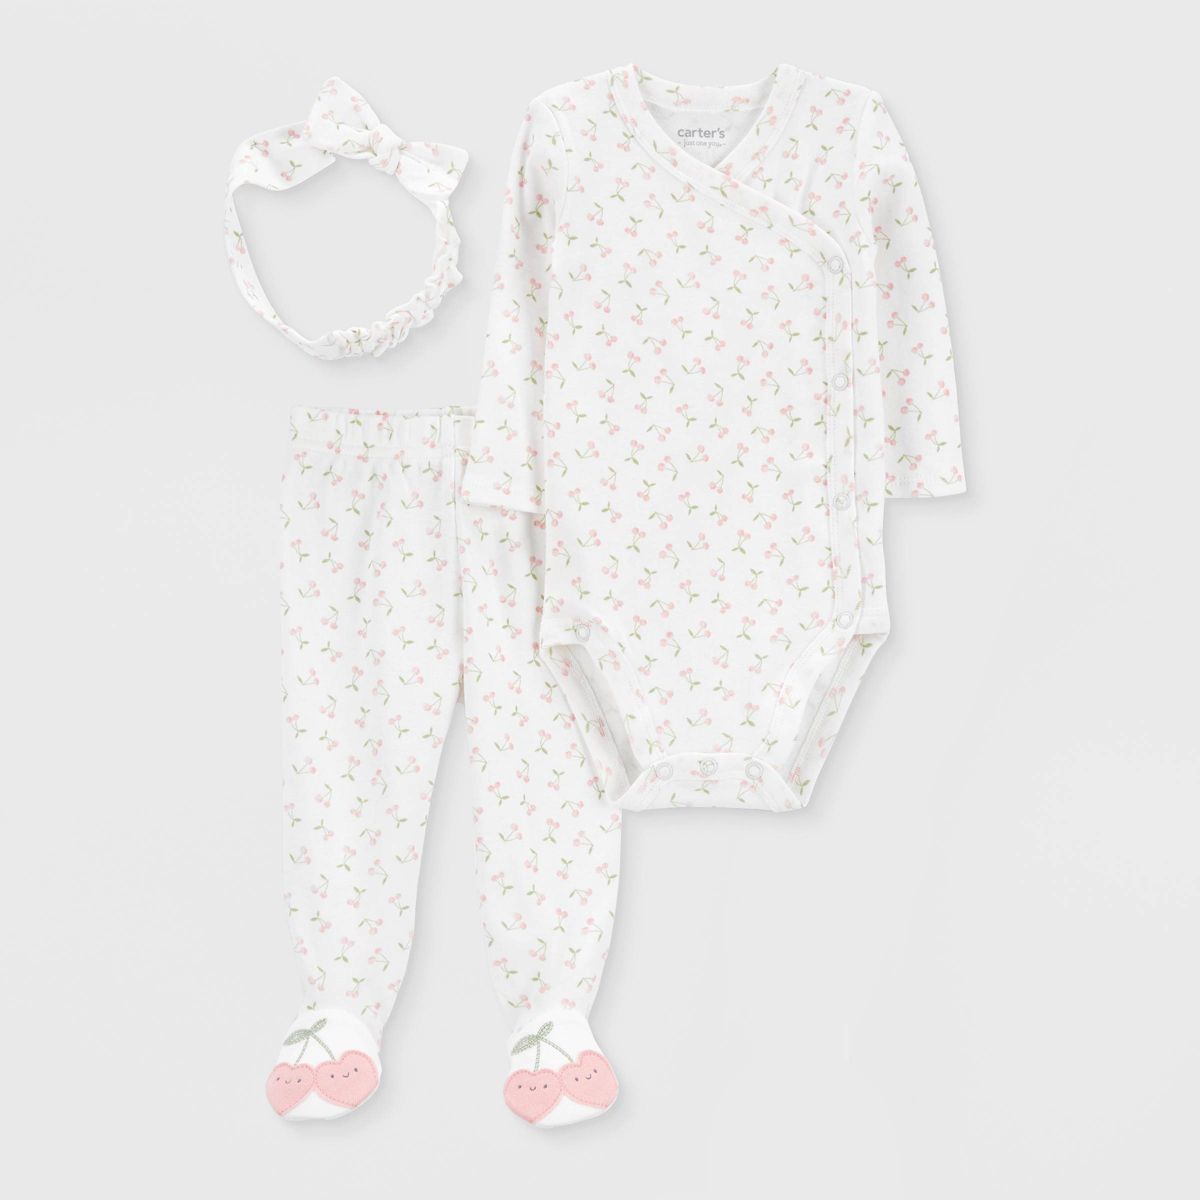 Carter's Just One You® Baby Girls' 3pc Footed Headband Top & Bottom Set - Pink | Target